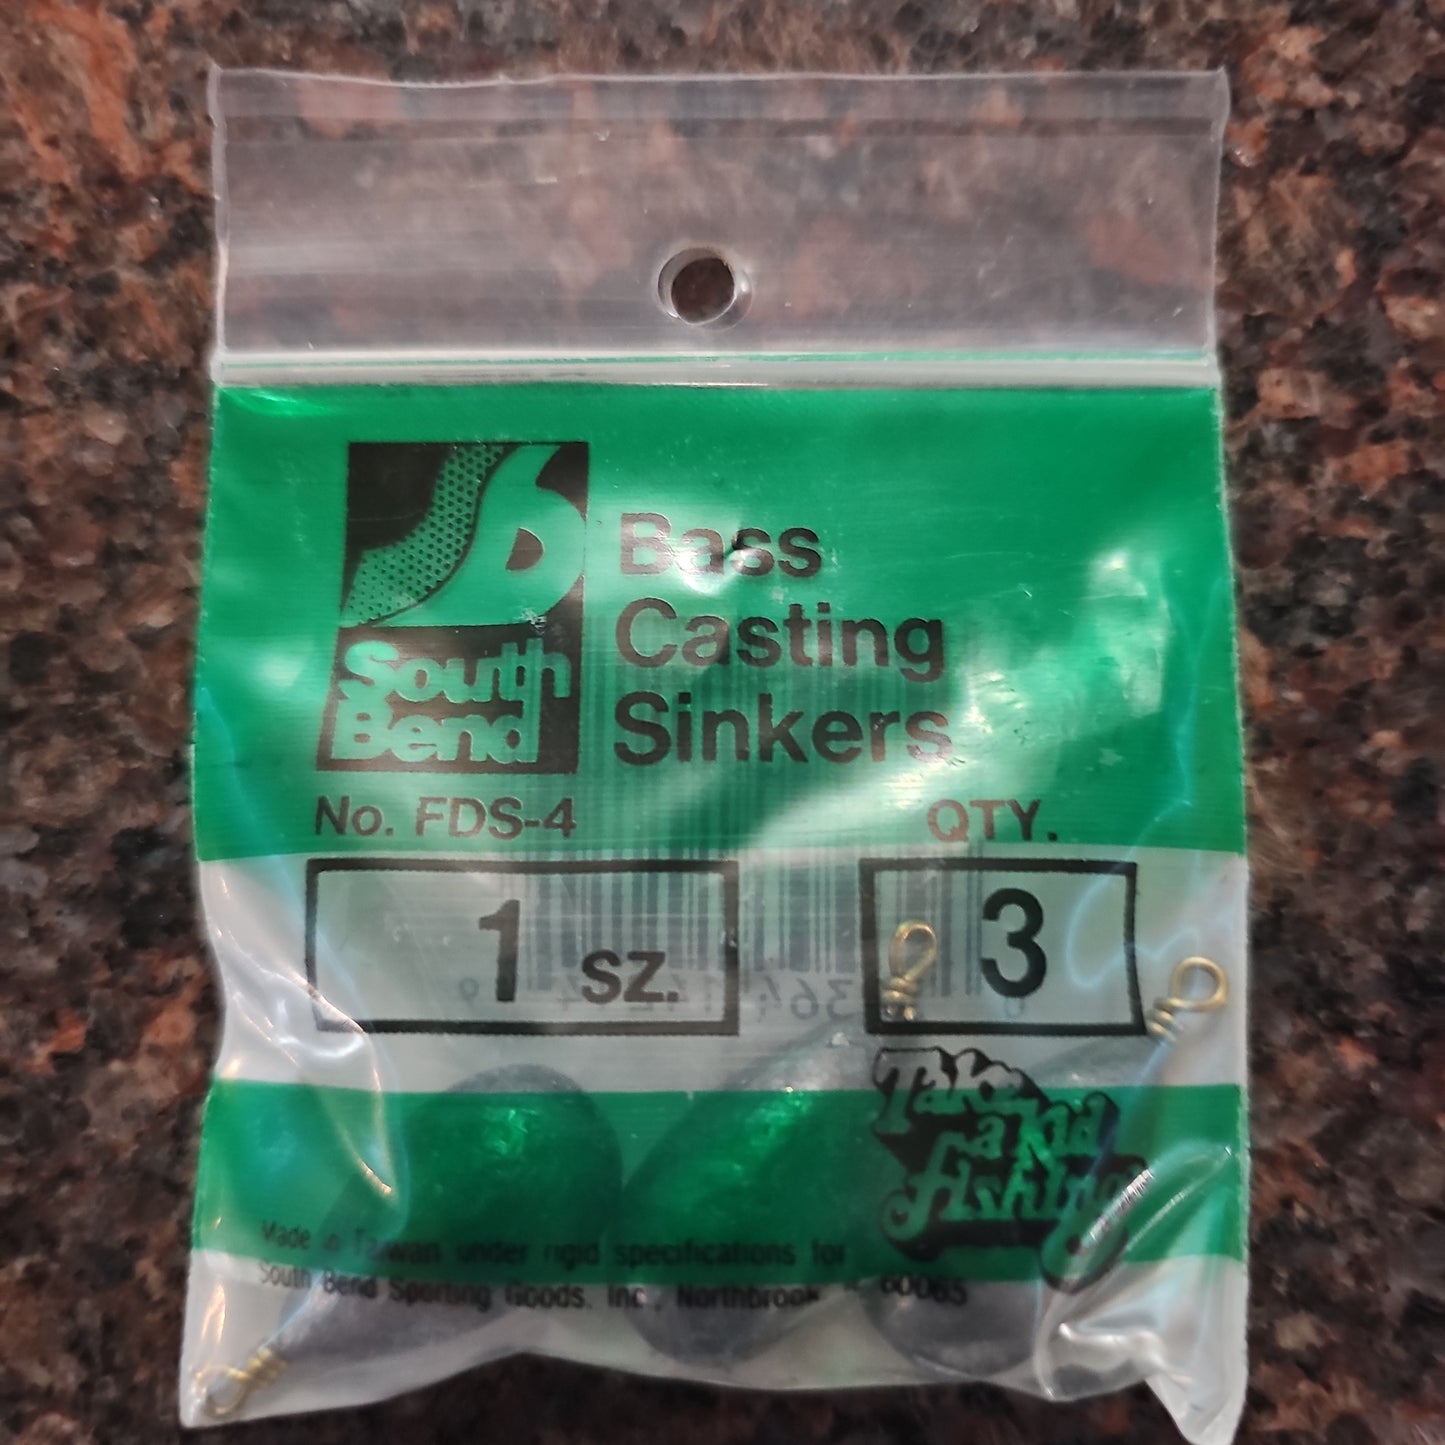 South Bend Bass Casting Sinkers